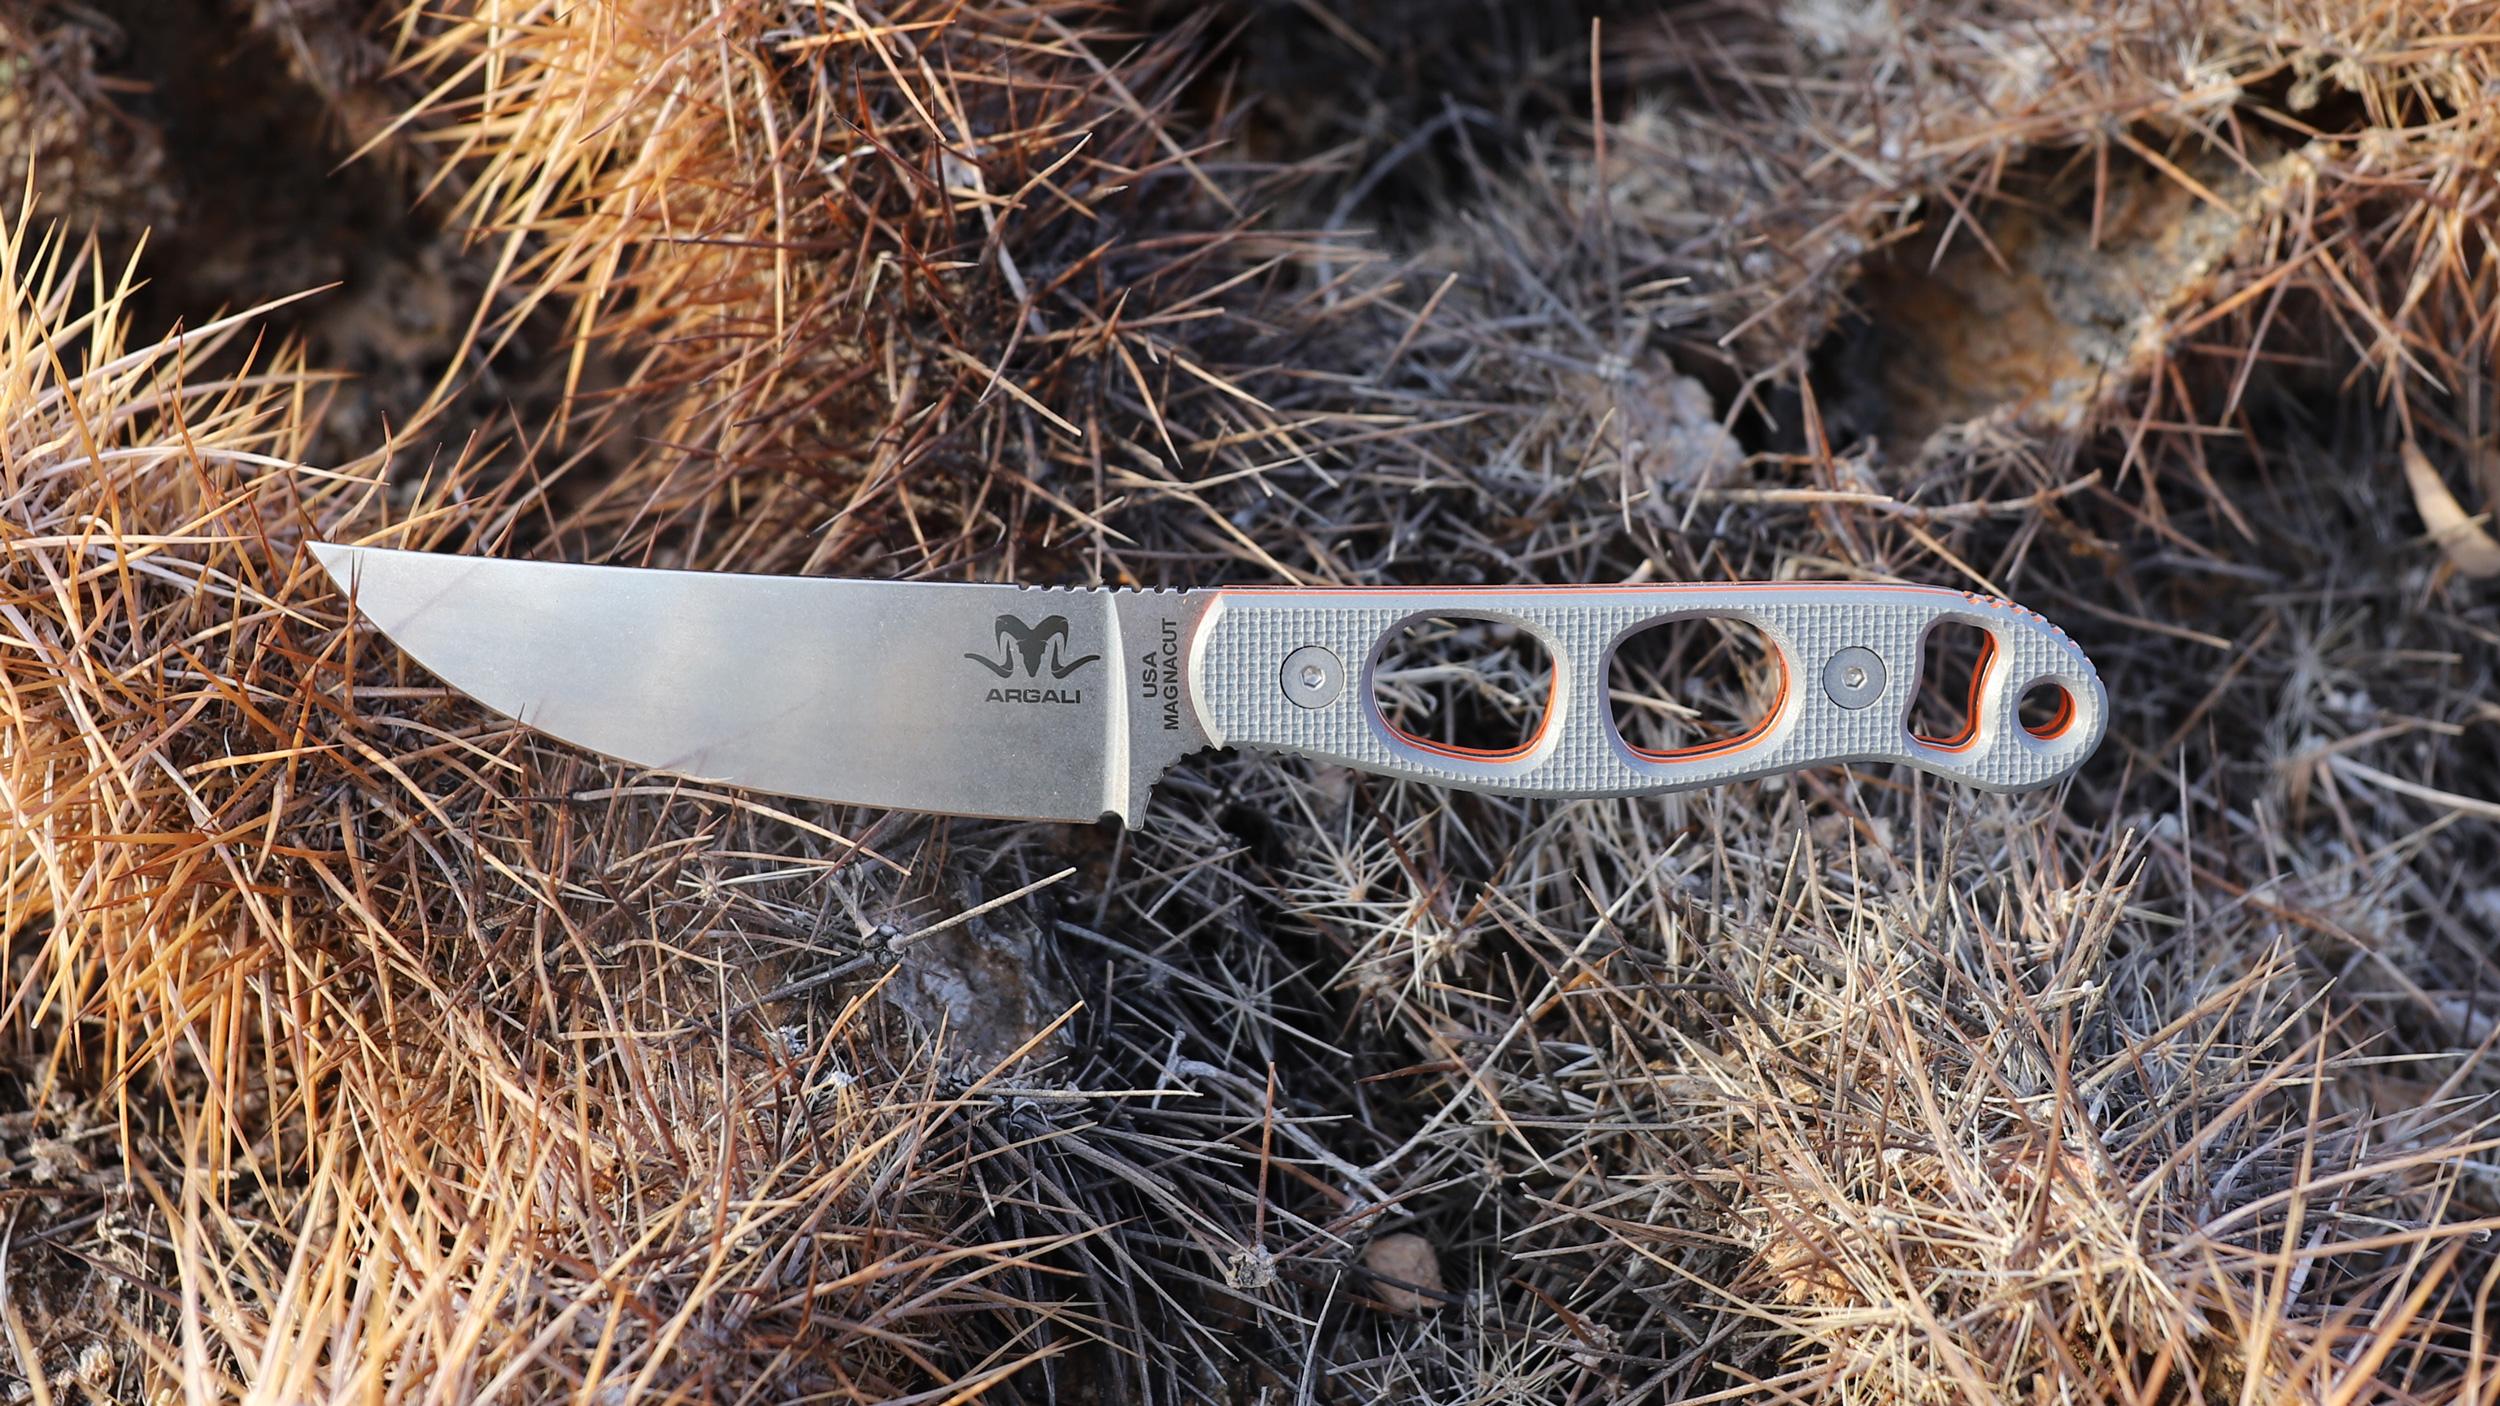 The Argali Sawtooth Knife made from magnacut steel